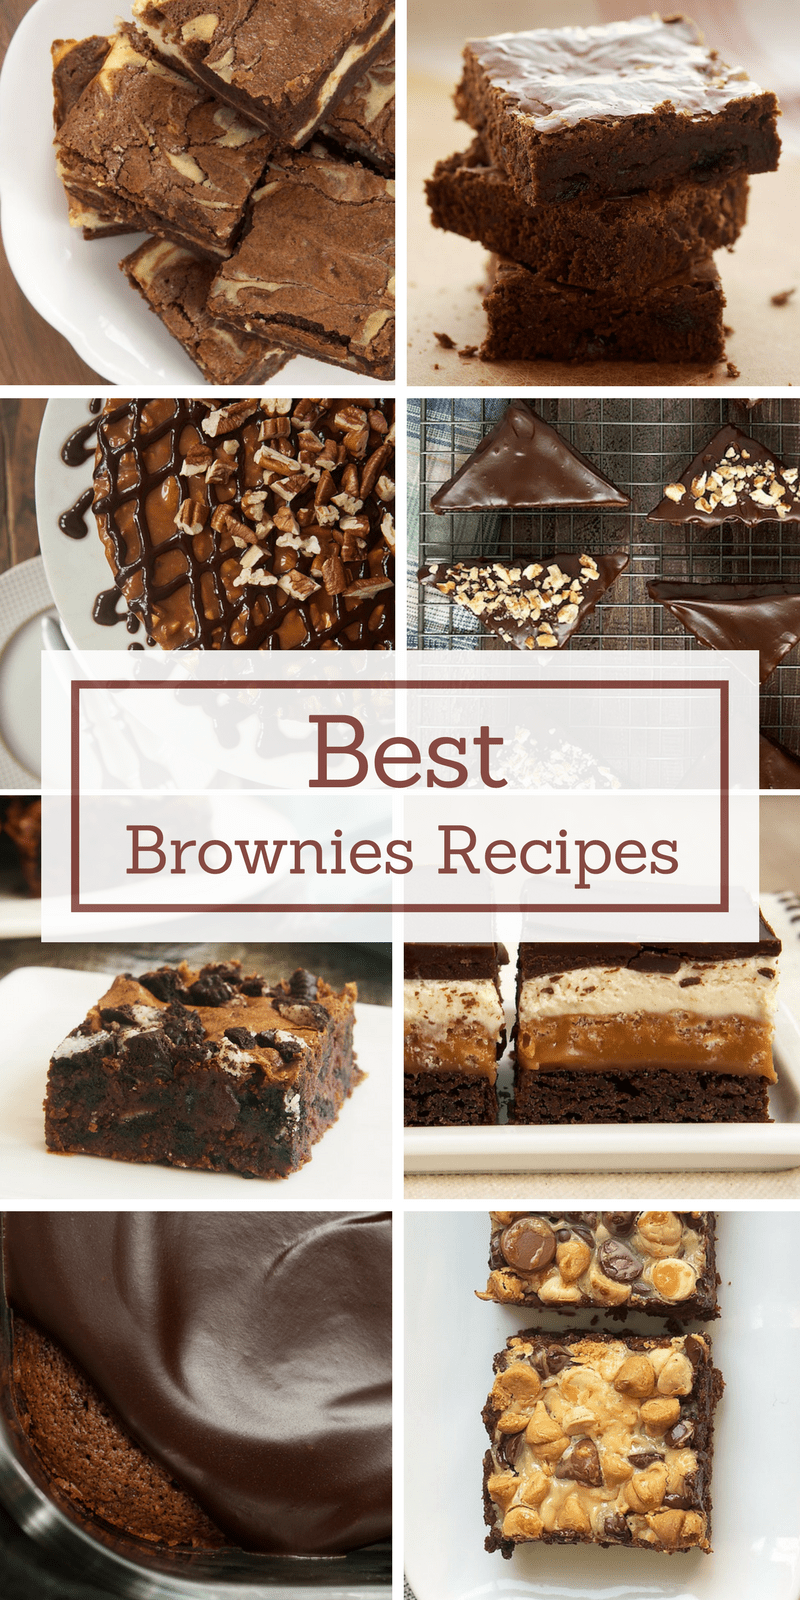 If you love brownies in a big way, then don't miss this fantastic collection of the most popular brownies recipes from Bake or Break!